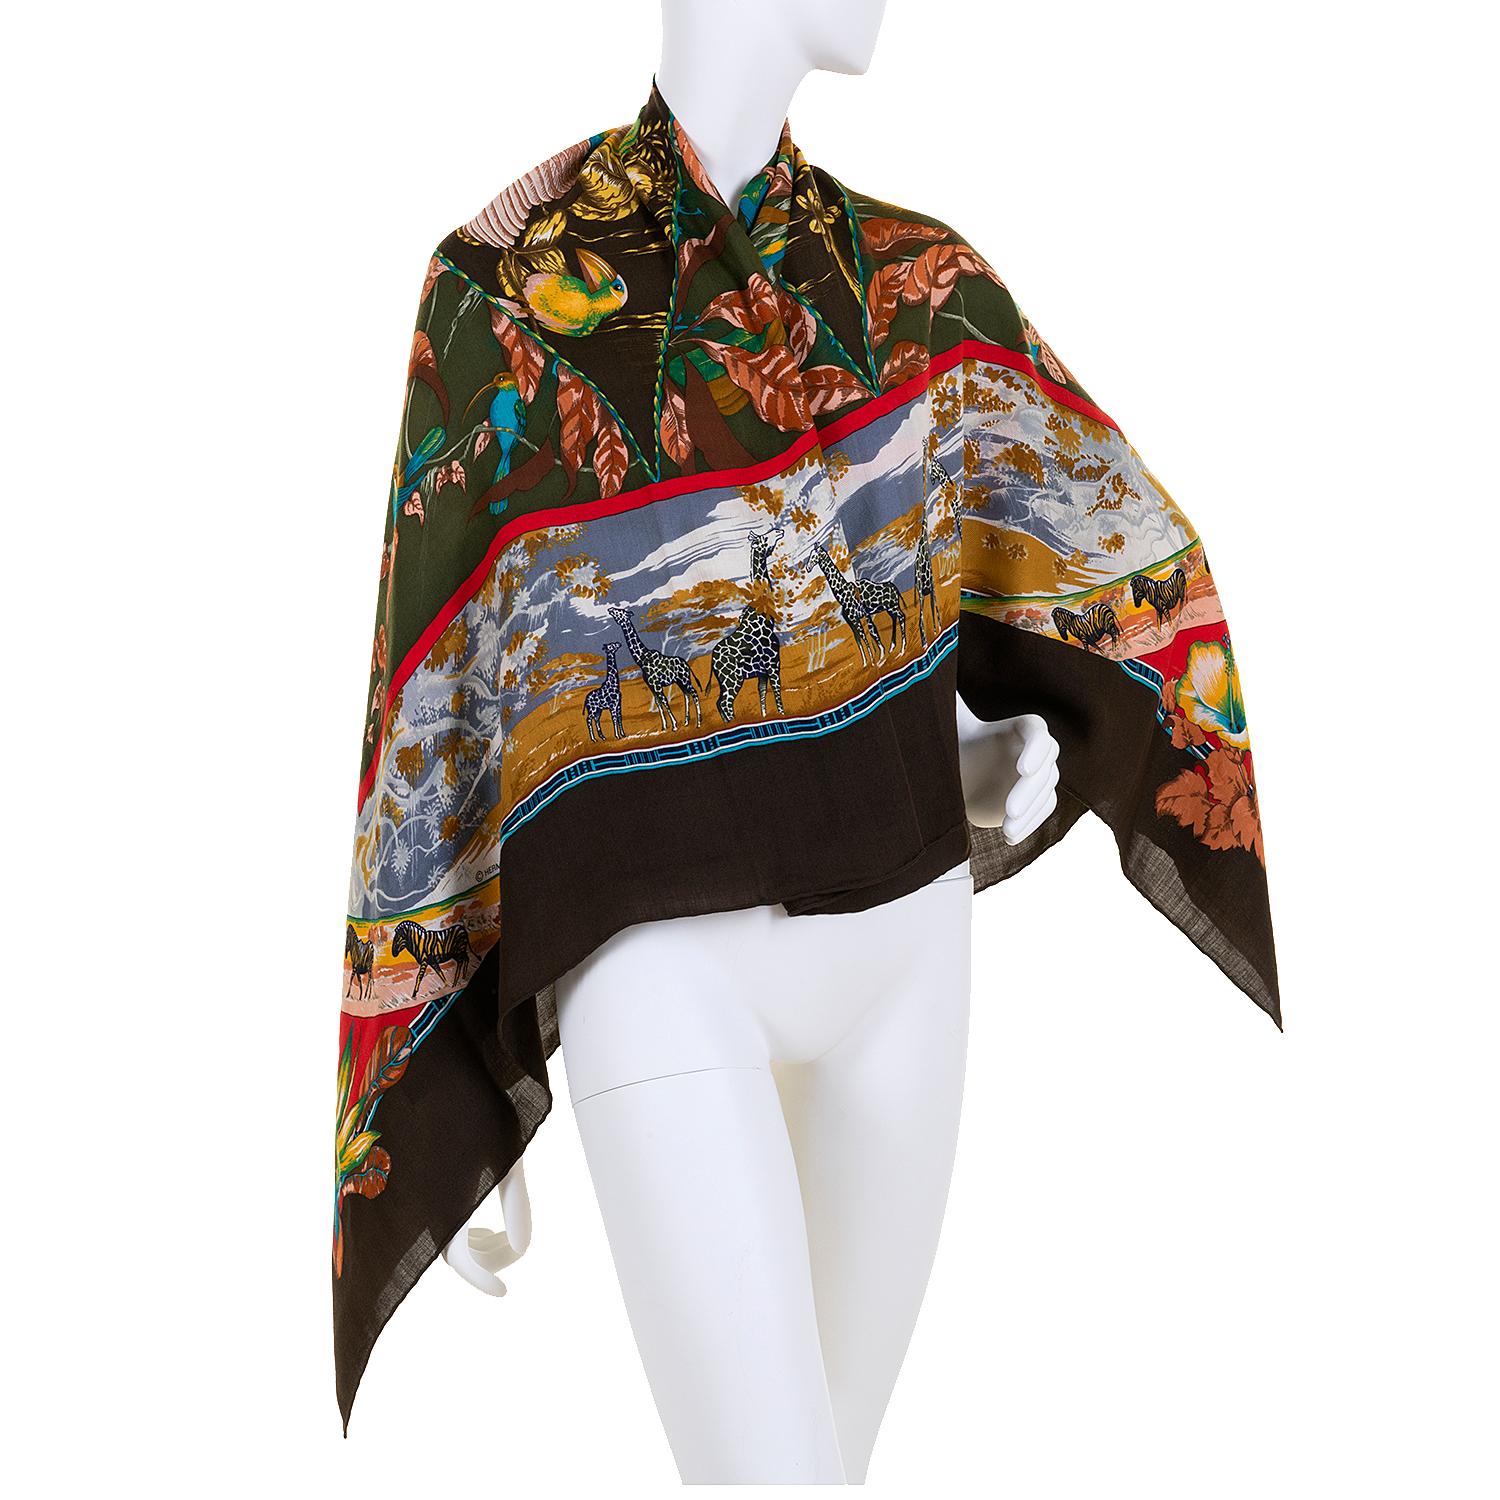 A stunningly beautiful Hermes Cashmere Shawl. In pristine condition, the scarf was designed by the legendary Hermes designer Laurence 'Toutsy' Bourthoumieu, in 1987. Rich, exotic colours are featured on a chocolate brown border. Still with it's